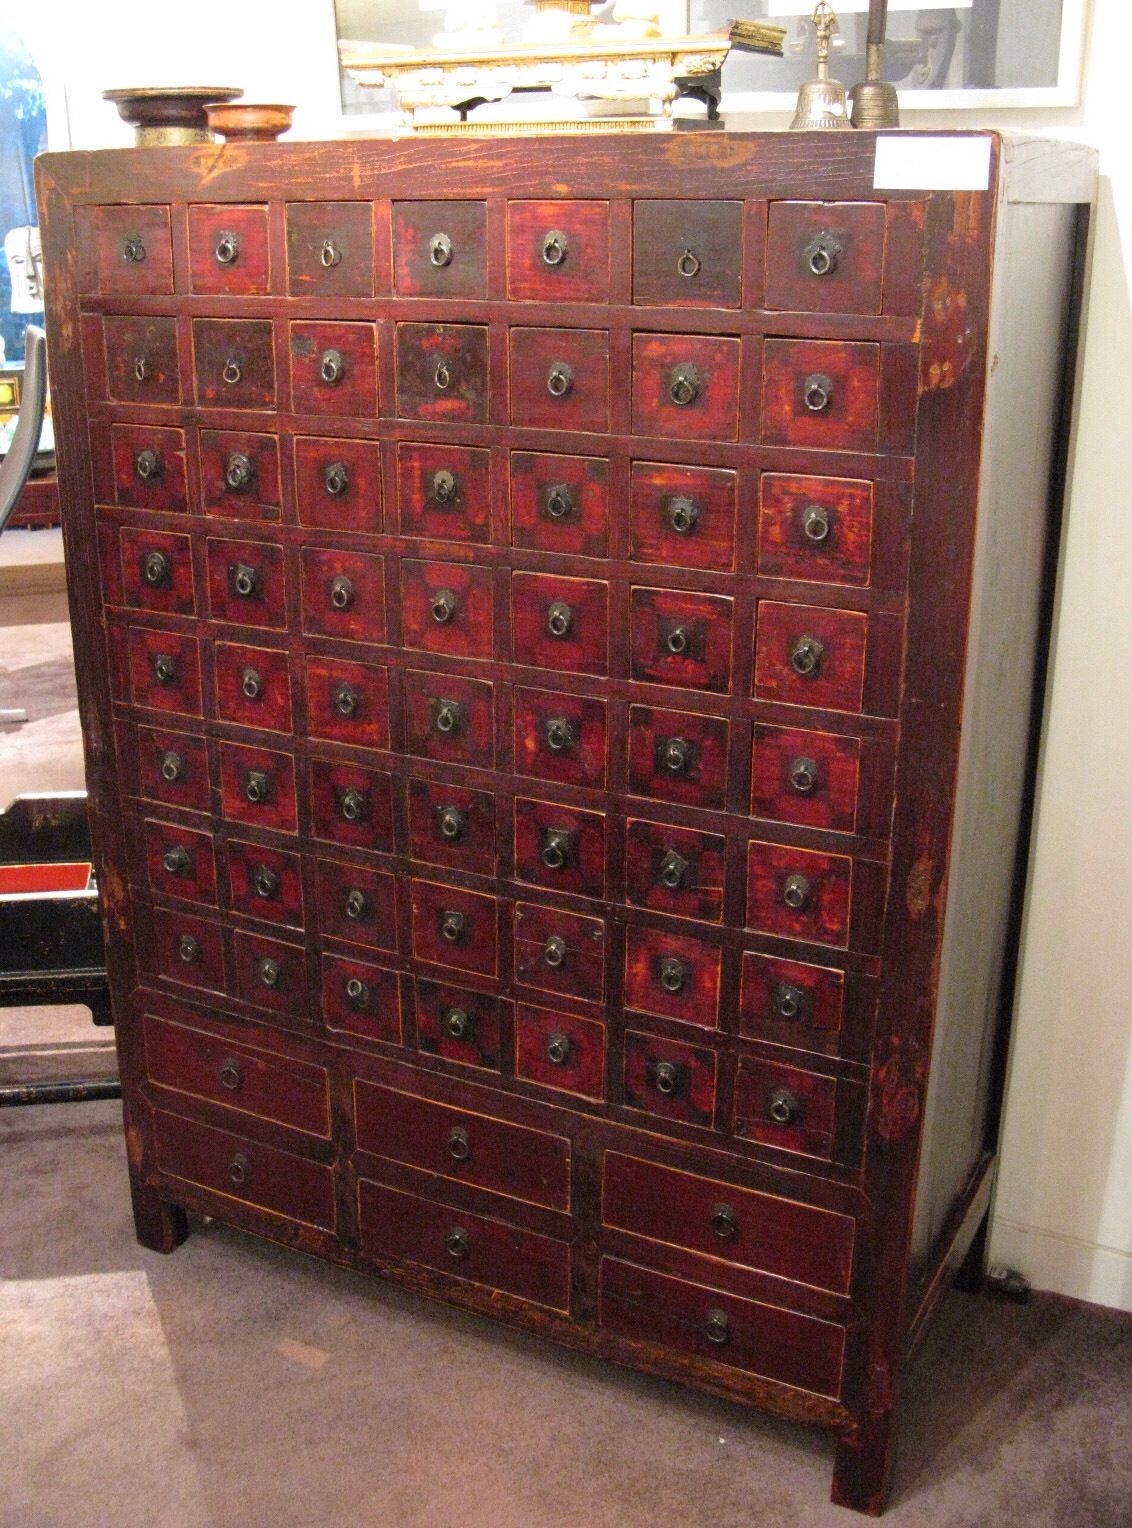 Cabinet with many small drawers